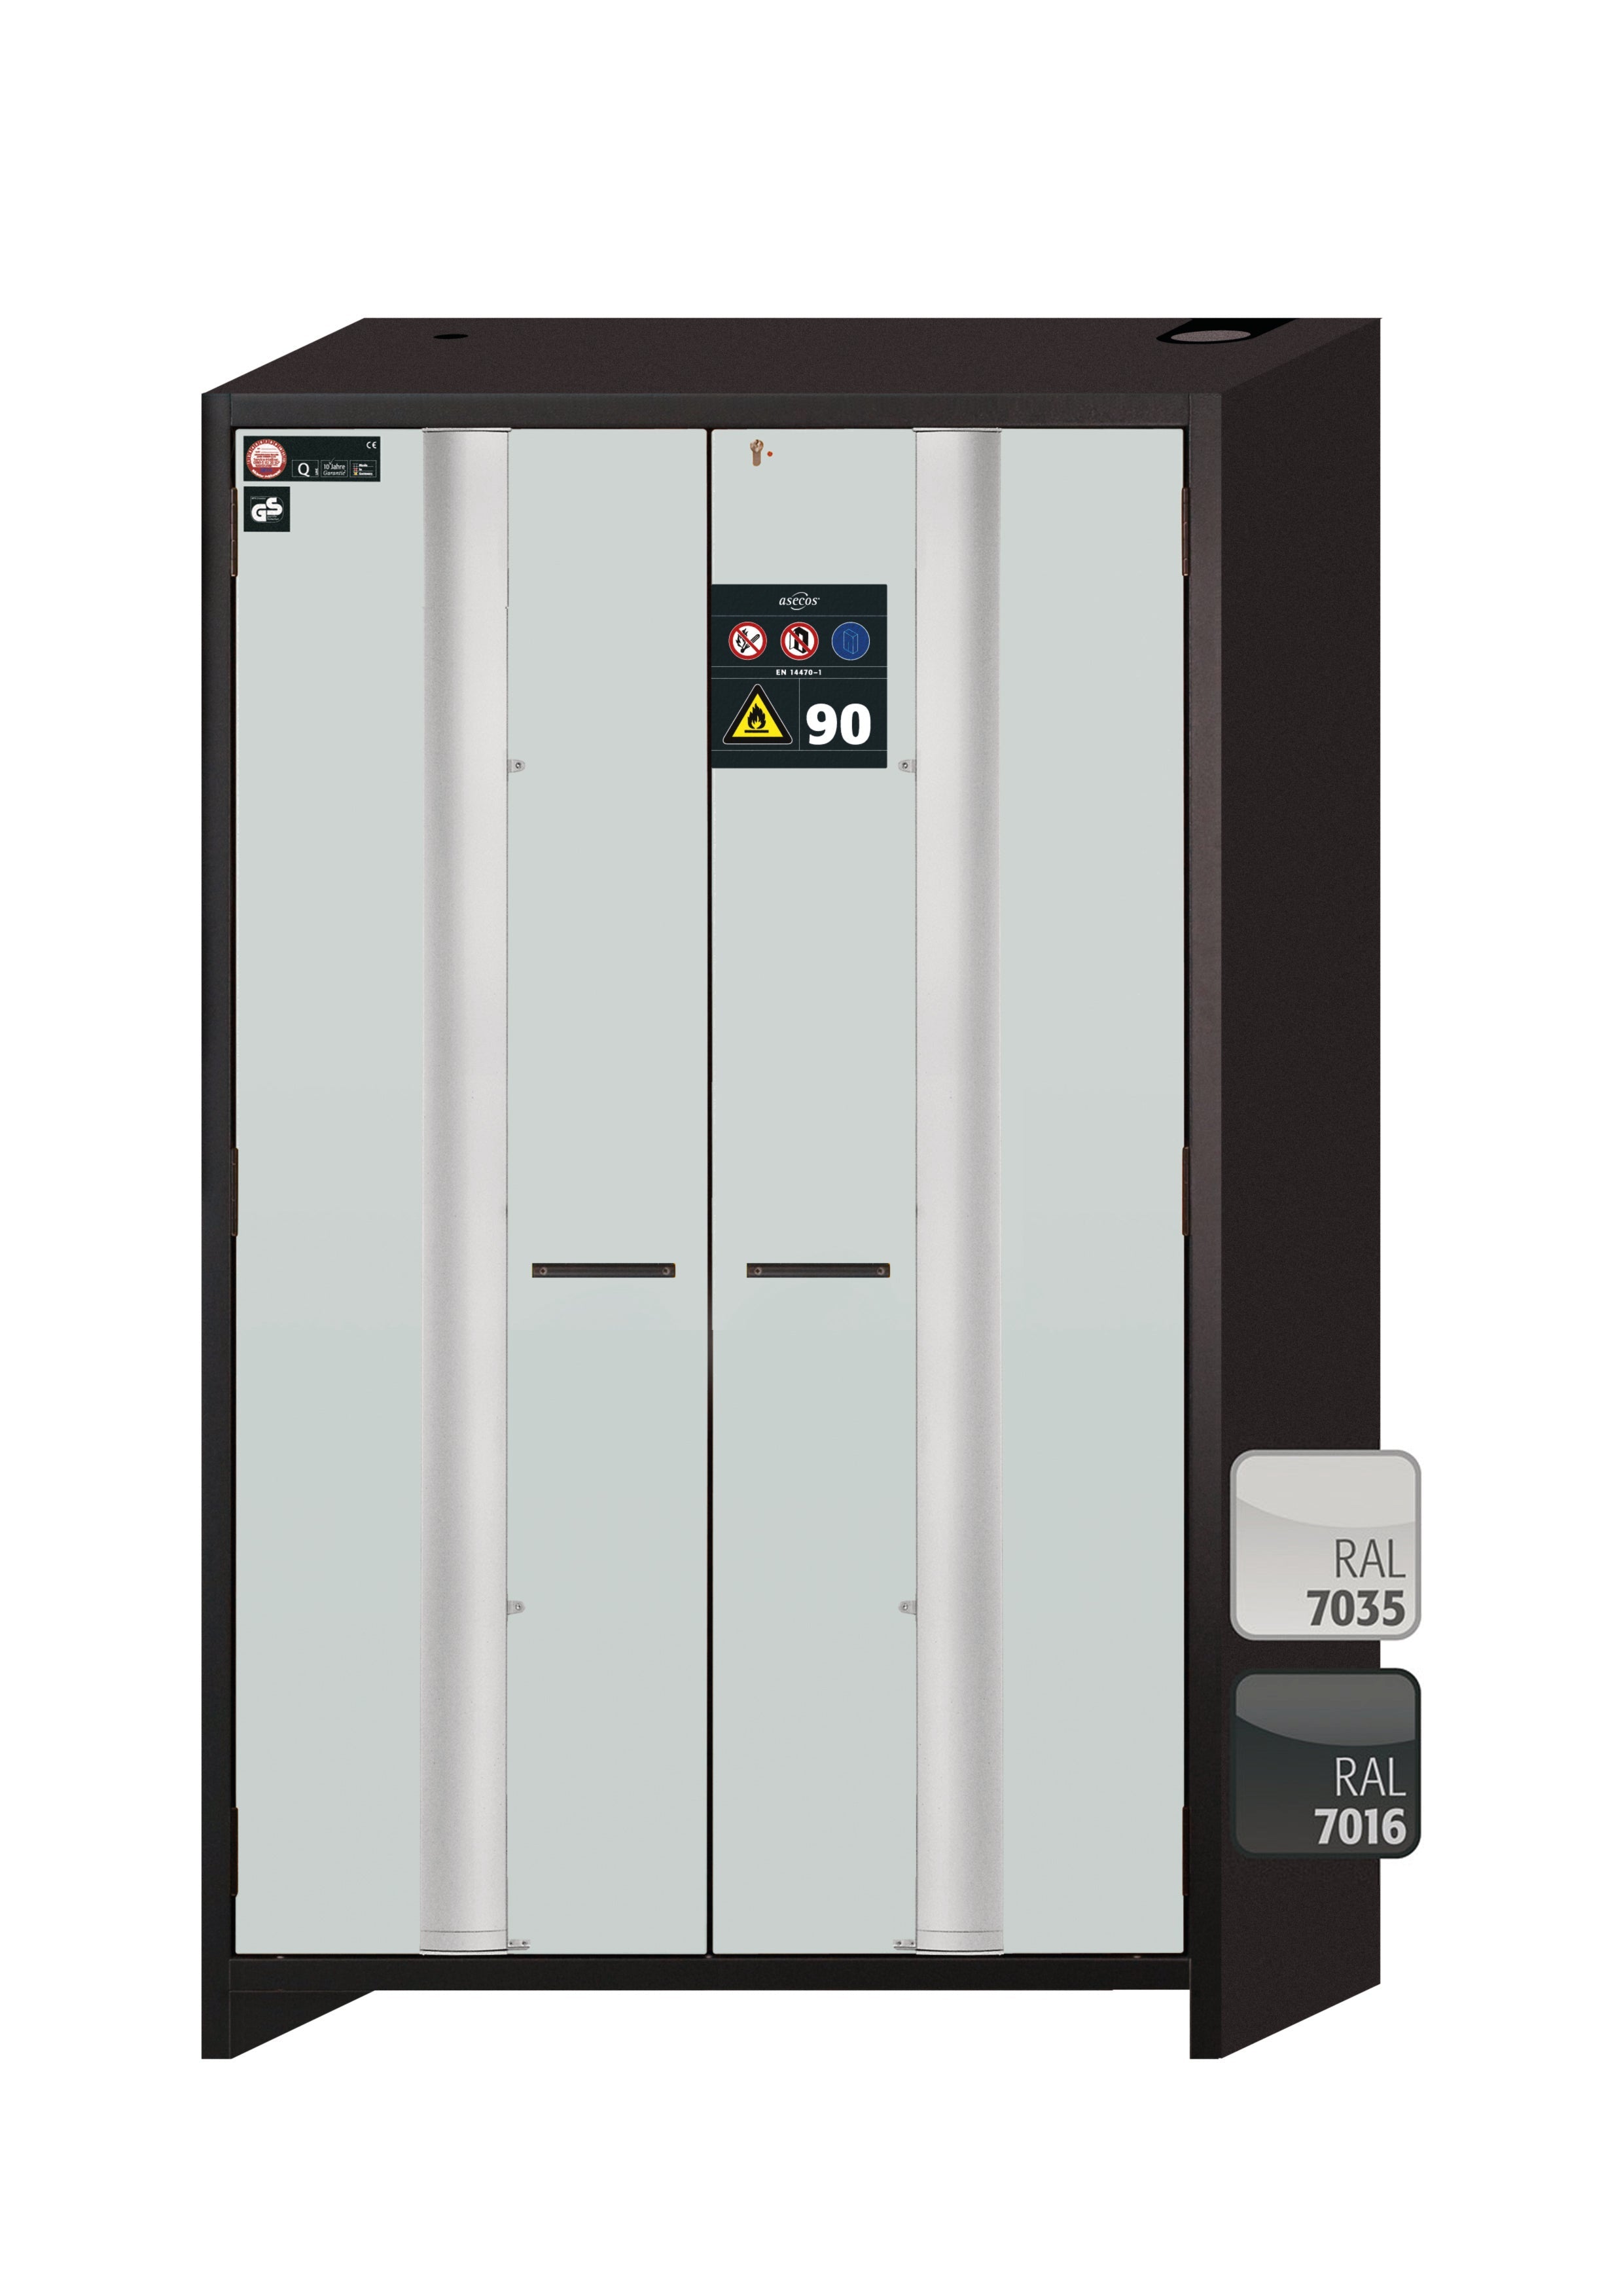 Type 90 safety cabinet Q-PHOENIX-90 model Q90.195.120.FD in light gray RAL 7035 with 2x standard pull-out tray (stainless steel 1.4301)